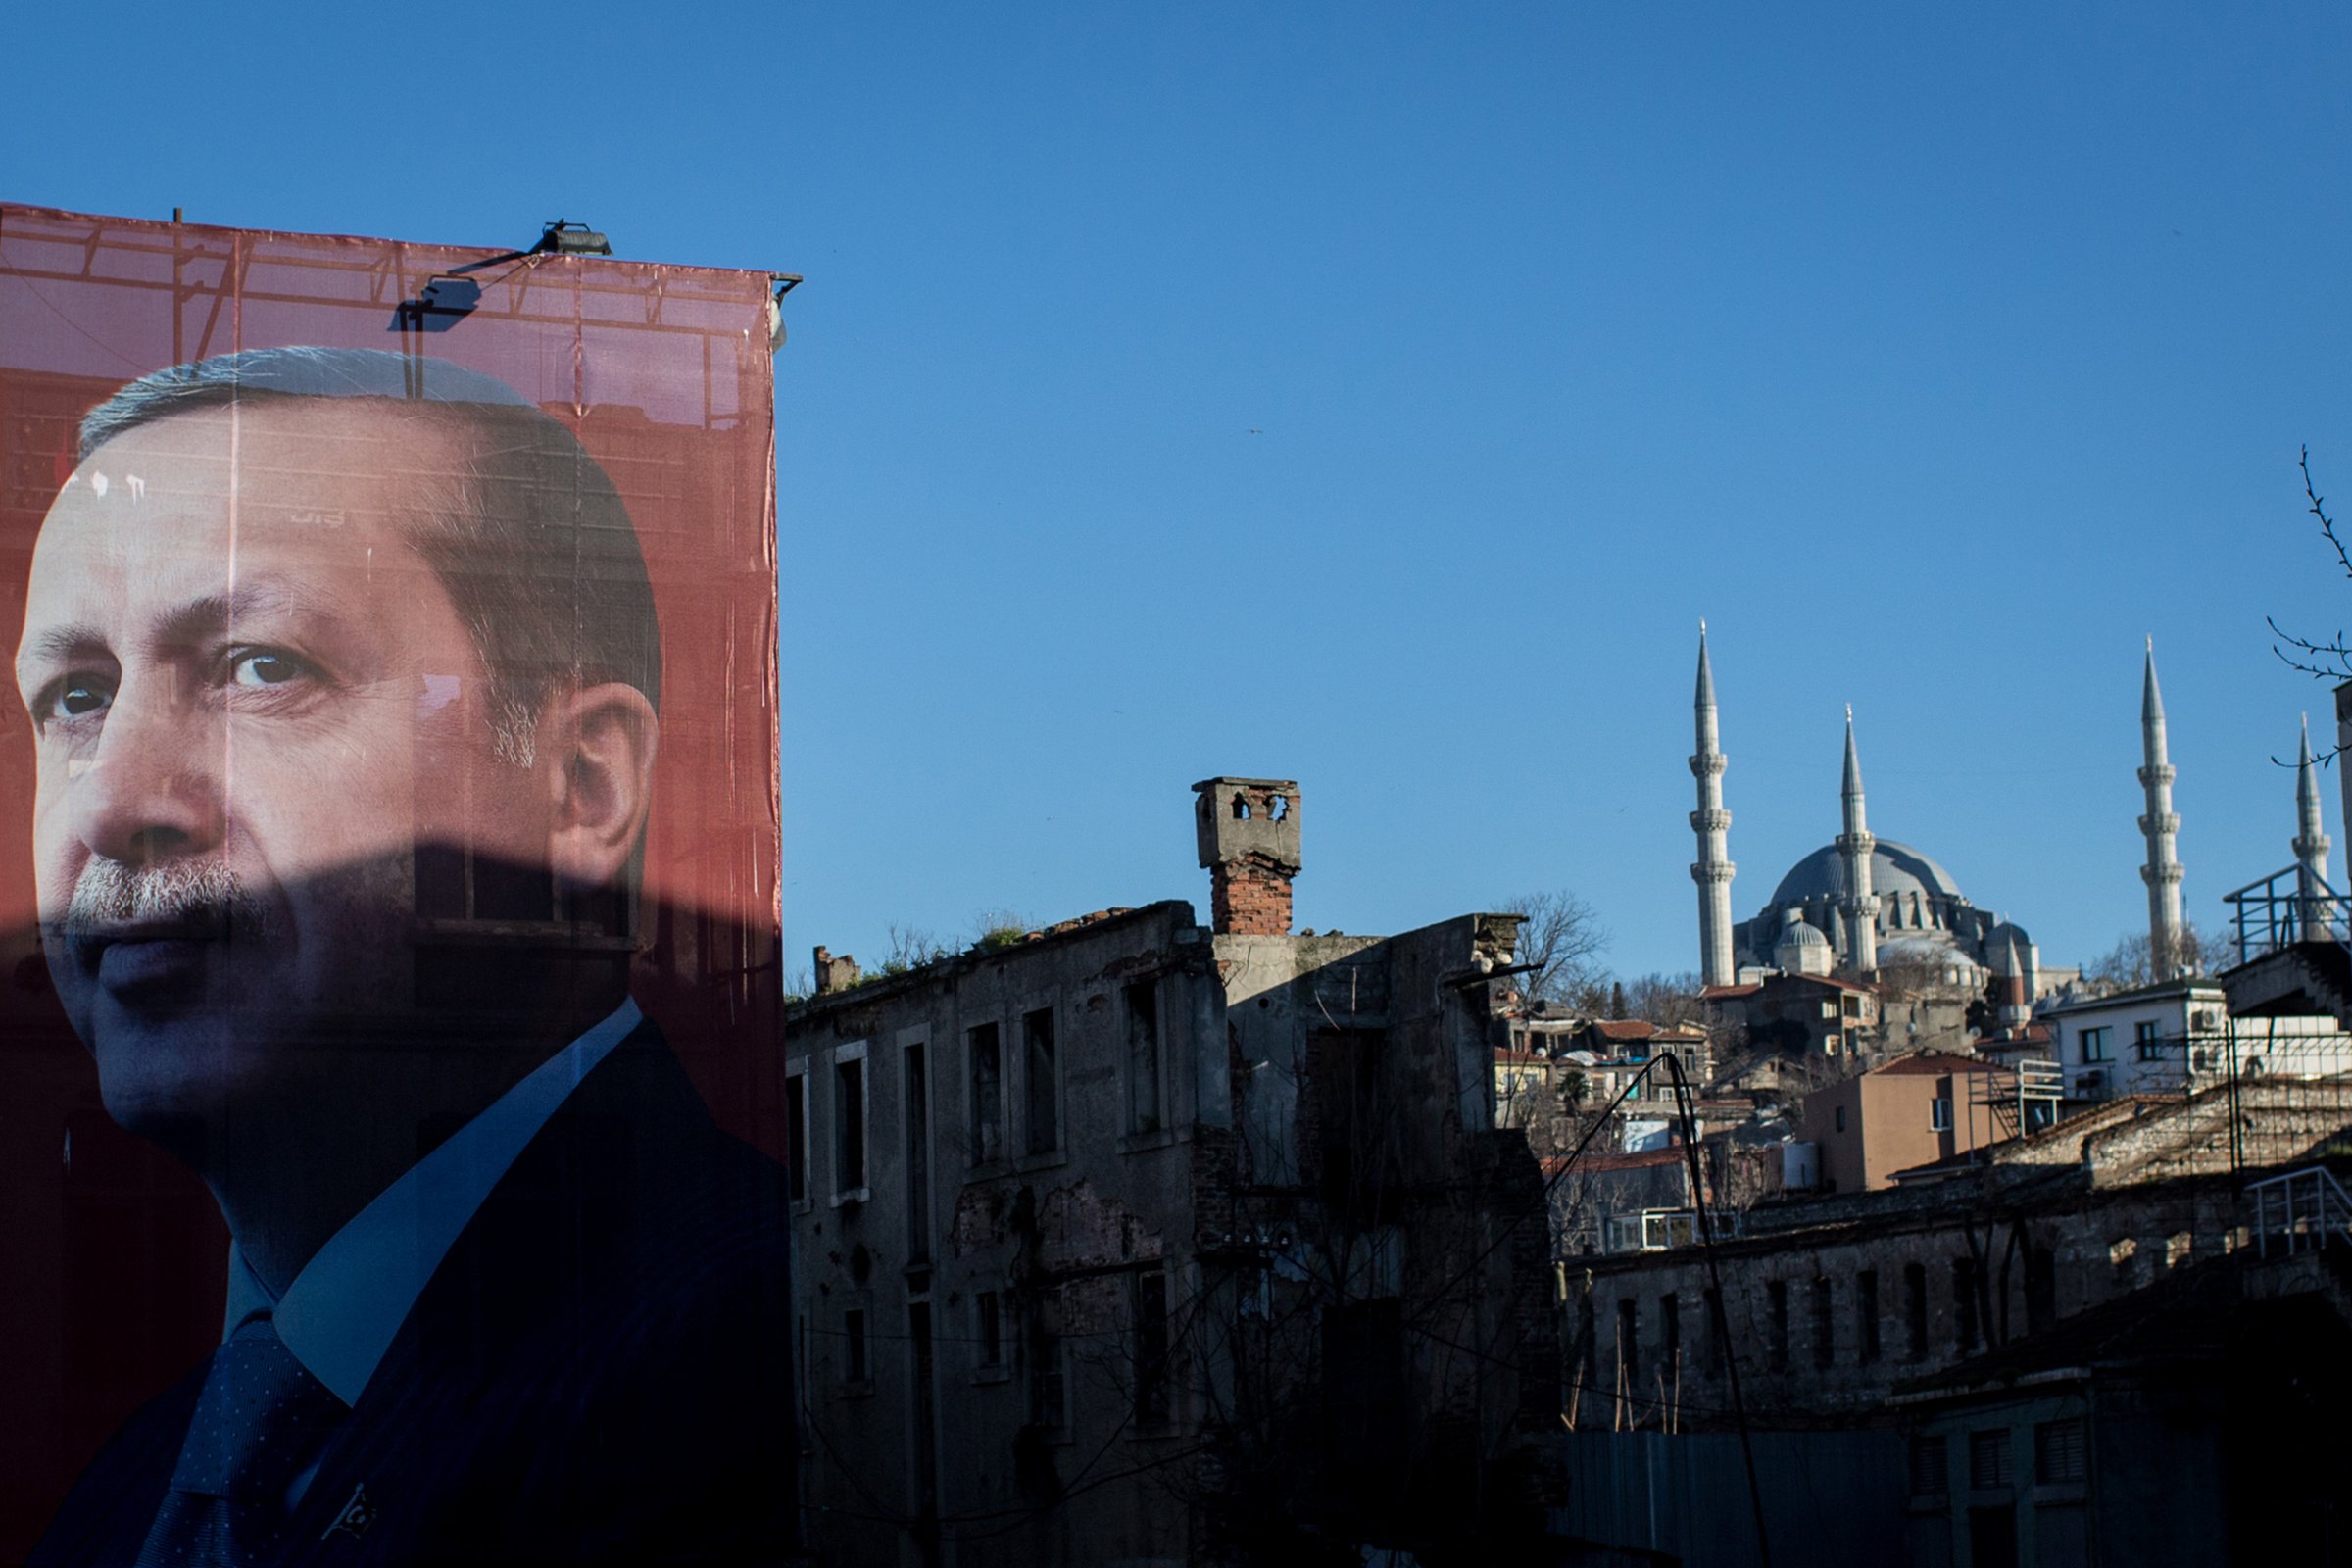 A "Yes" campaign billboard showing President Recep Tayyip Erdogan in Istanbul on March 29, 2017. Turkey holds a referendum on constitutional amendments on April 16.